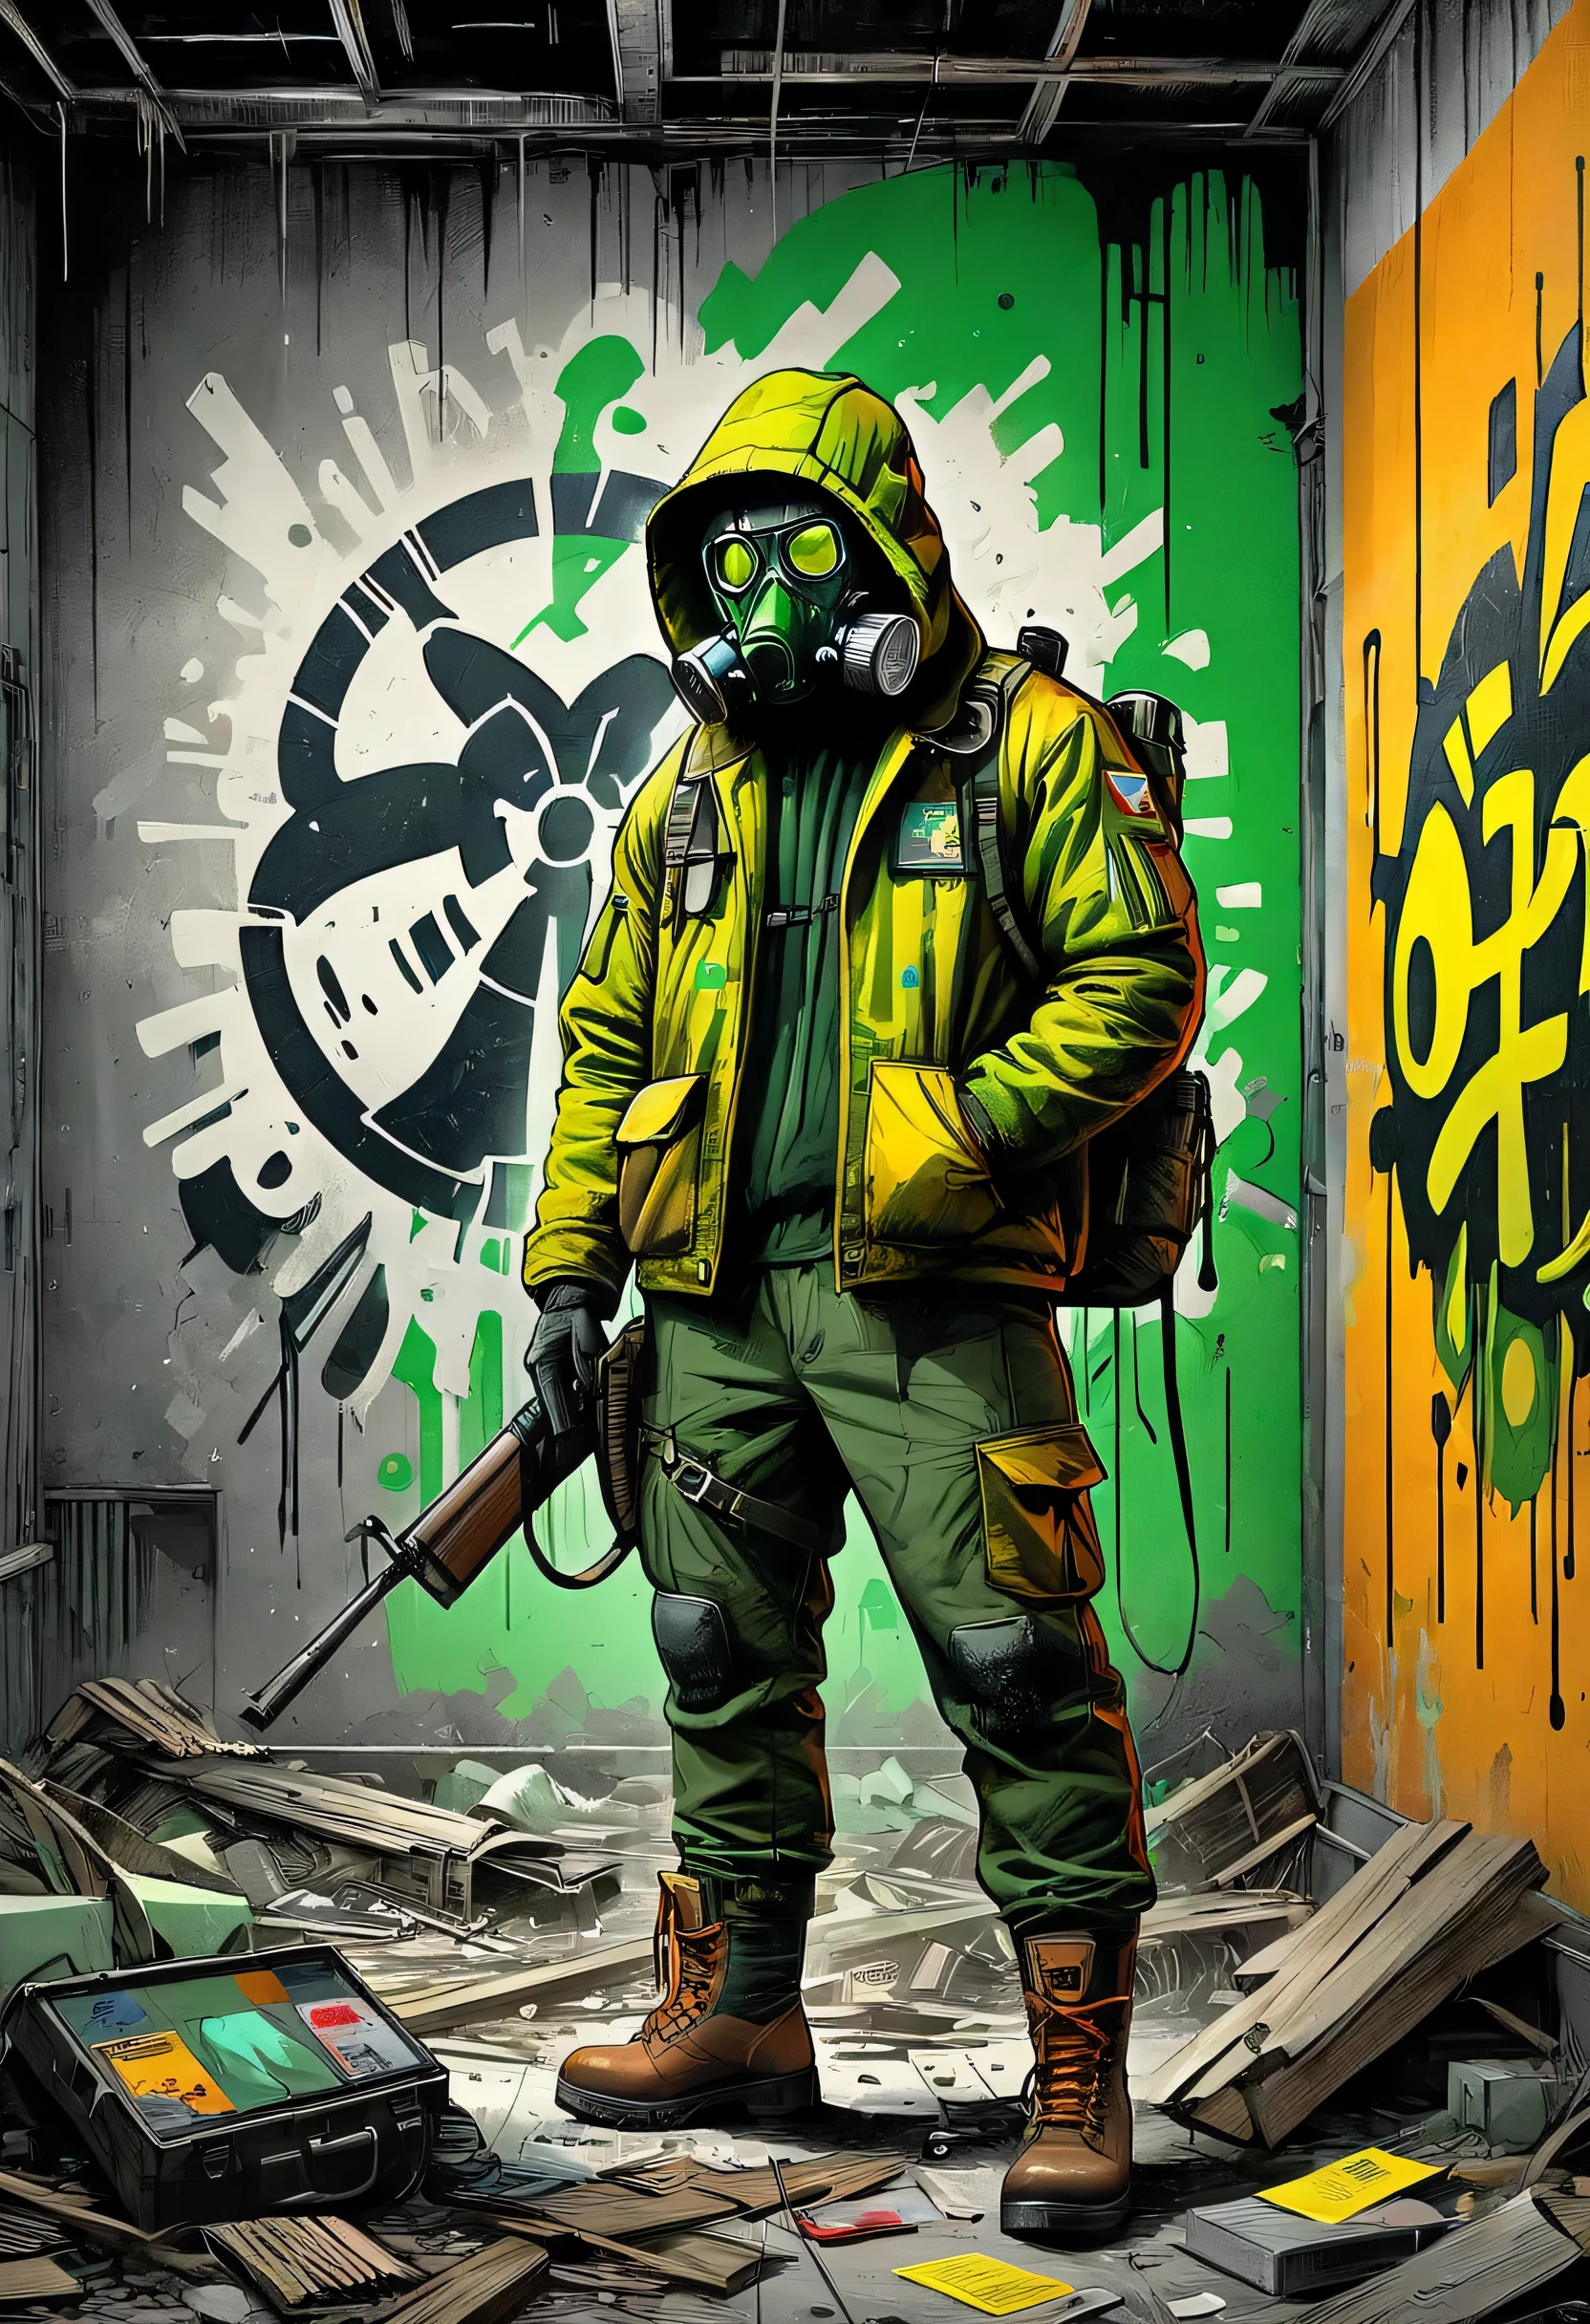 ((post apocalyptic Wasteland, abandoned place, rubble, destruction, destroyed buildings graffiti on walls:1.5)), ((Chernobyl, mutants, tattered clothes with hood and weapons, dynamic pose, epic:1.6)), ((background dark, full moon night:1.4)), (Masterpiece),(best quality:1.4), (Ultra-high resolution:1.4), detailed painting, (((Dark colors, green, cyan, white, intricate, danger signs , radiation:1.5) ), (( post apocalyptic:1.4 )), (( best quality, vibrant, 32K, well-defined lights and shadows without text:1.3).